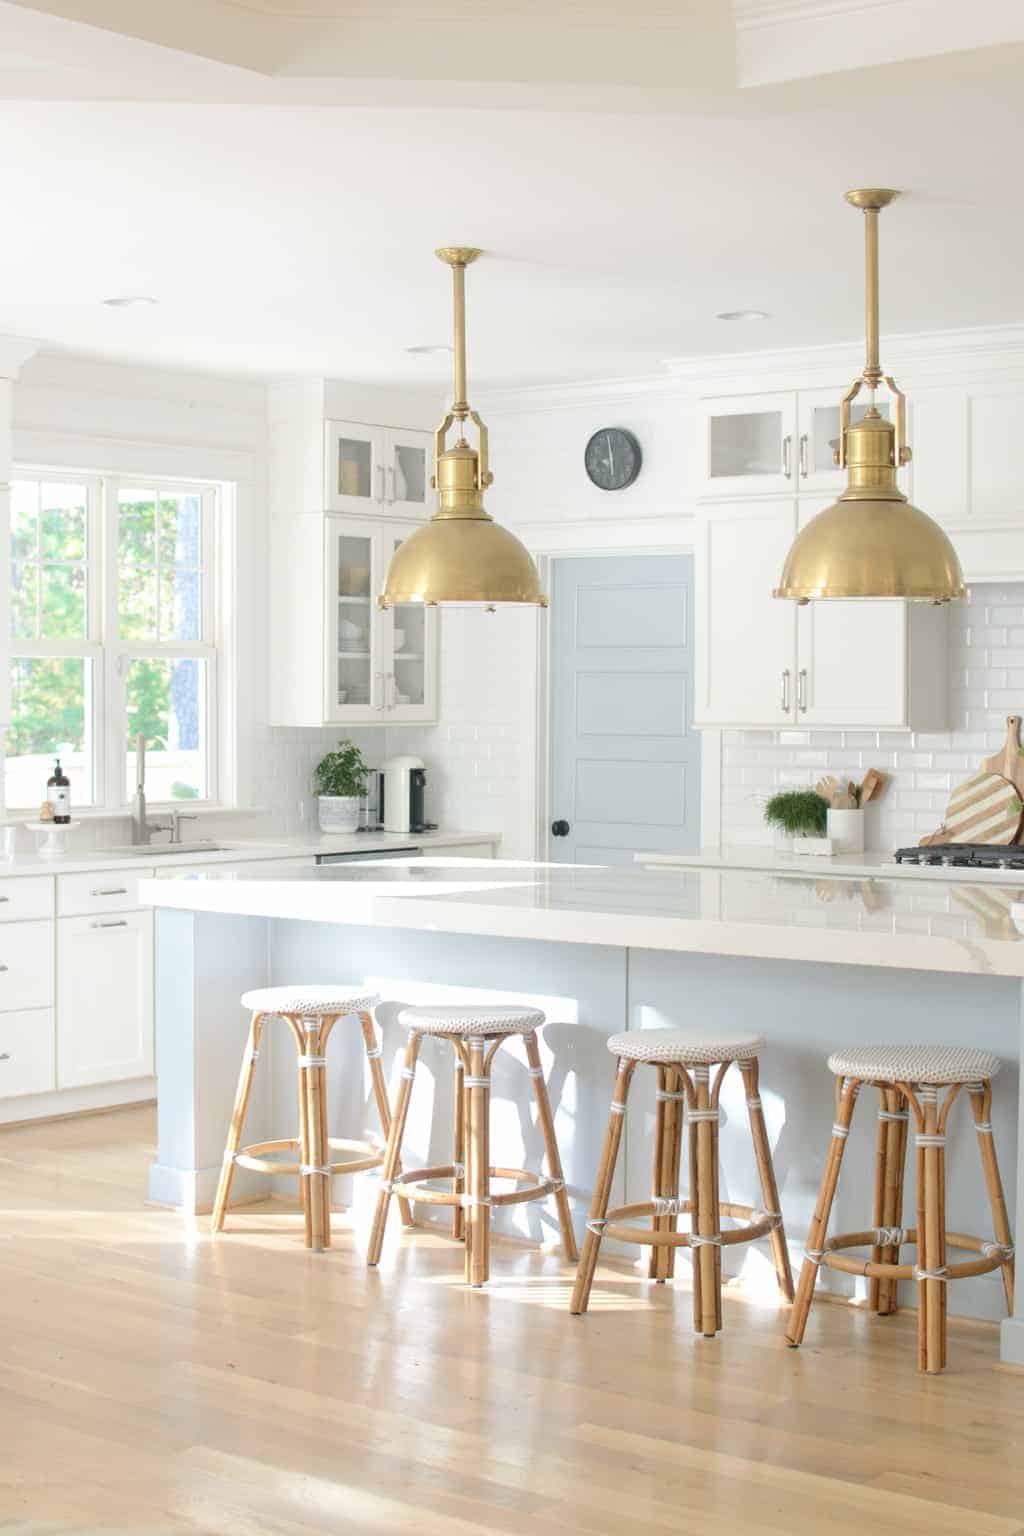 Coastal chic kitchen with brass accents and white backsplash. Island and door painted in Sherwin williams Krypton Blue. 